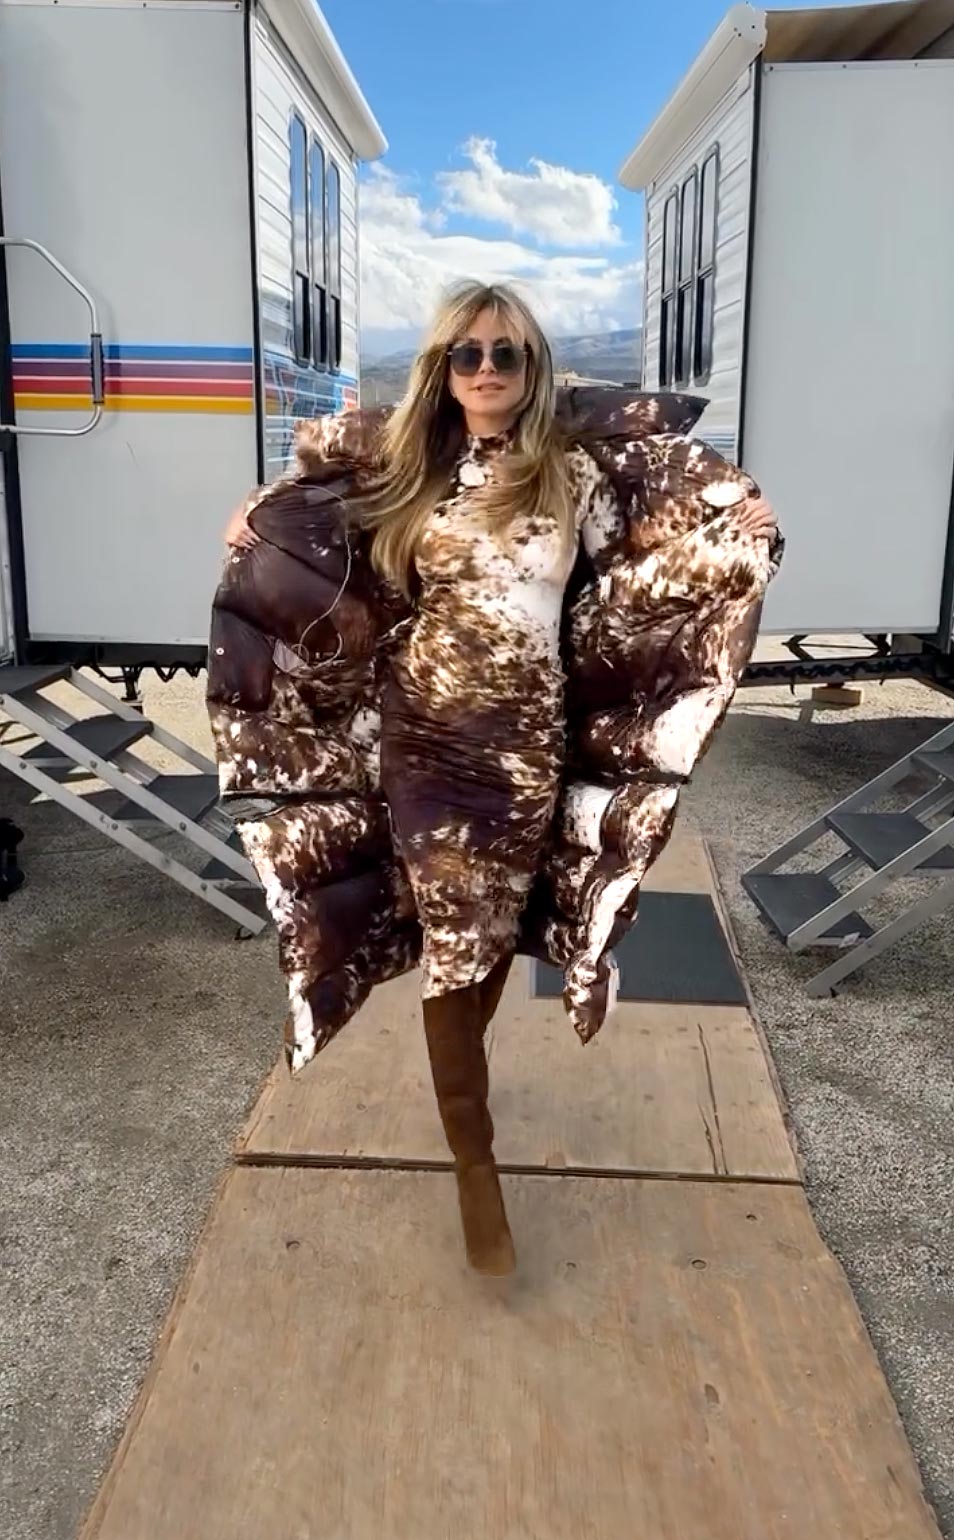 Heidi Klum Effortlessly Pulls off Animal Print Dress and Matching Coat While Dancing in a Parking Lot